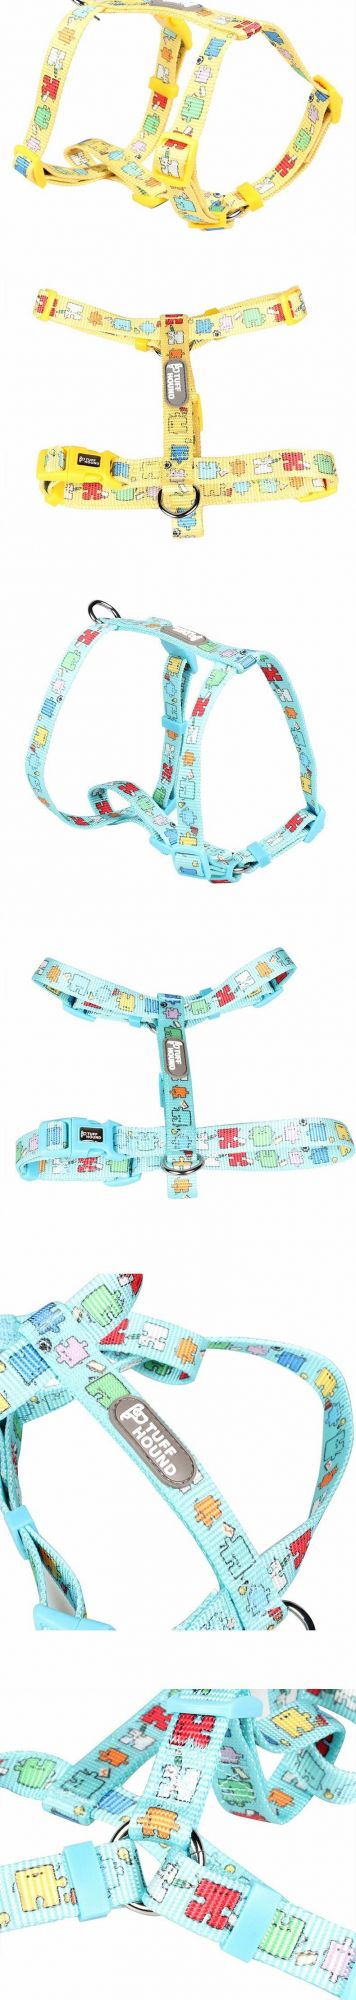 Rope Dog Collar Pet Supplies Dog Products Accessories Supply Harness